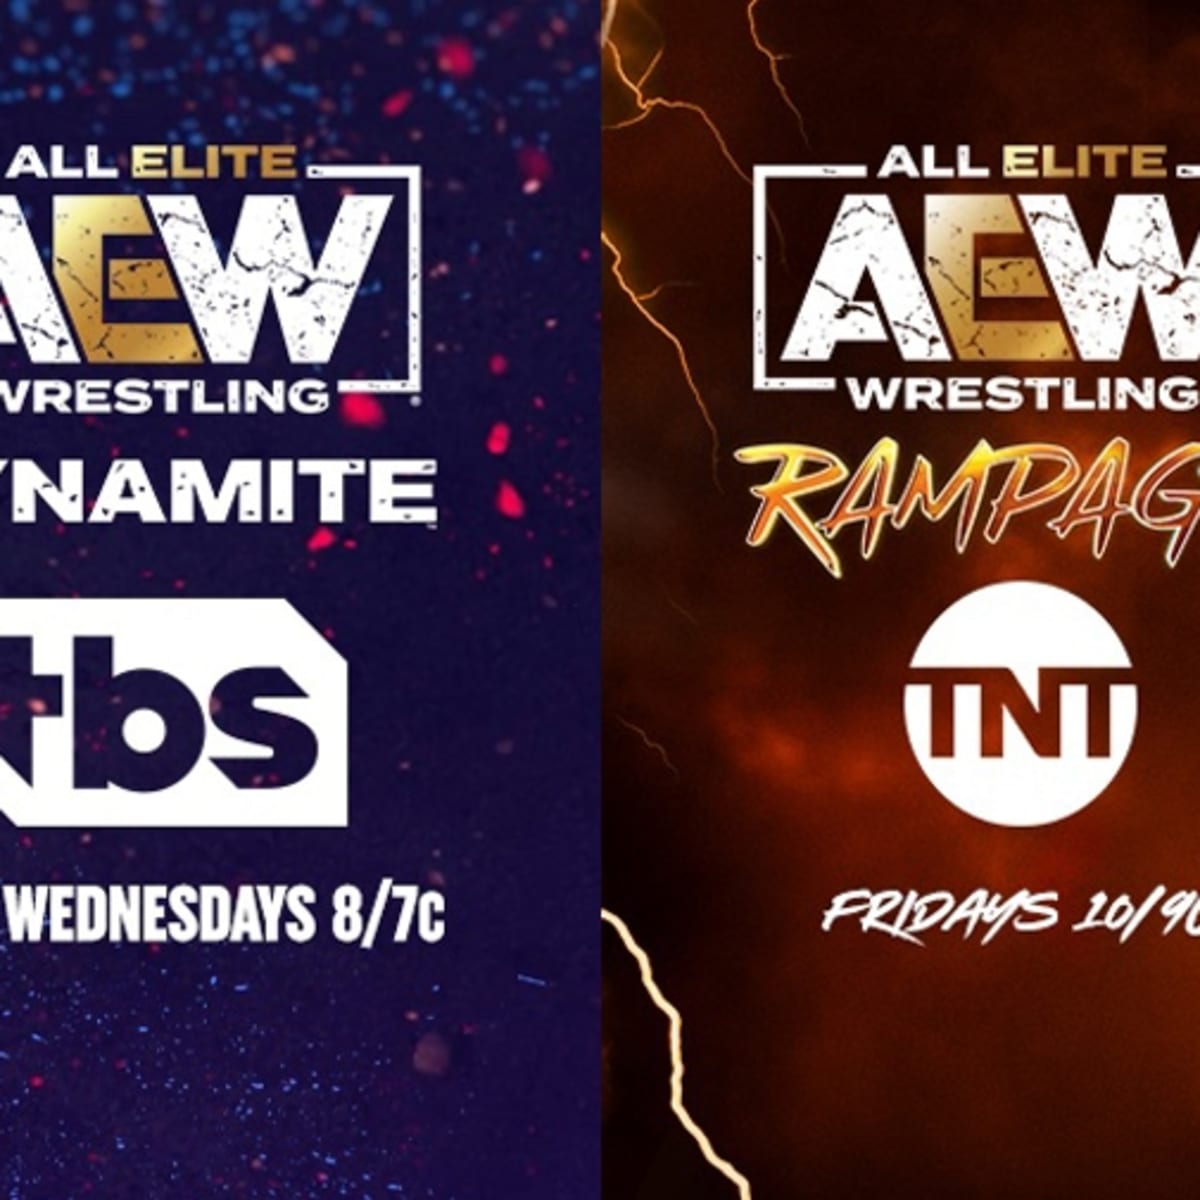 More details on the production changes coming to AEW Dynamite/Rampage